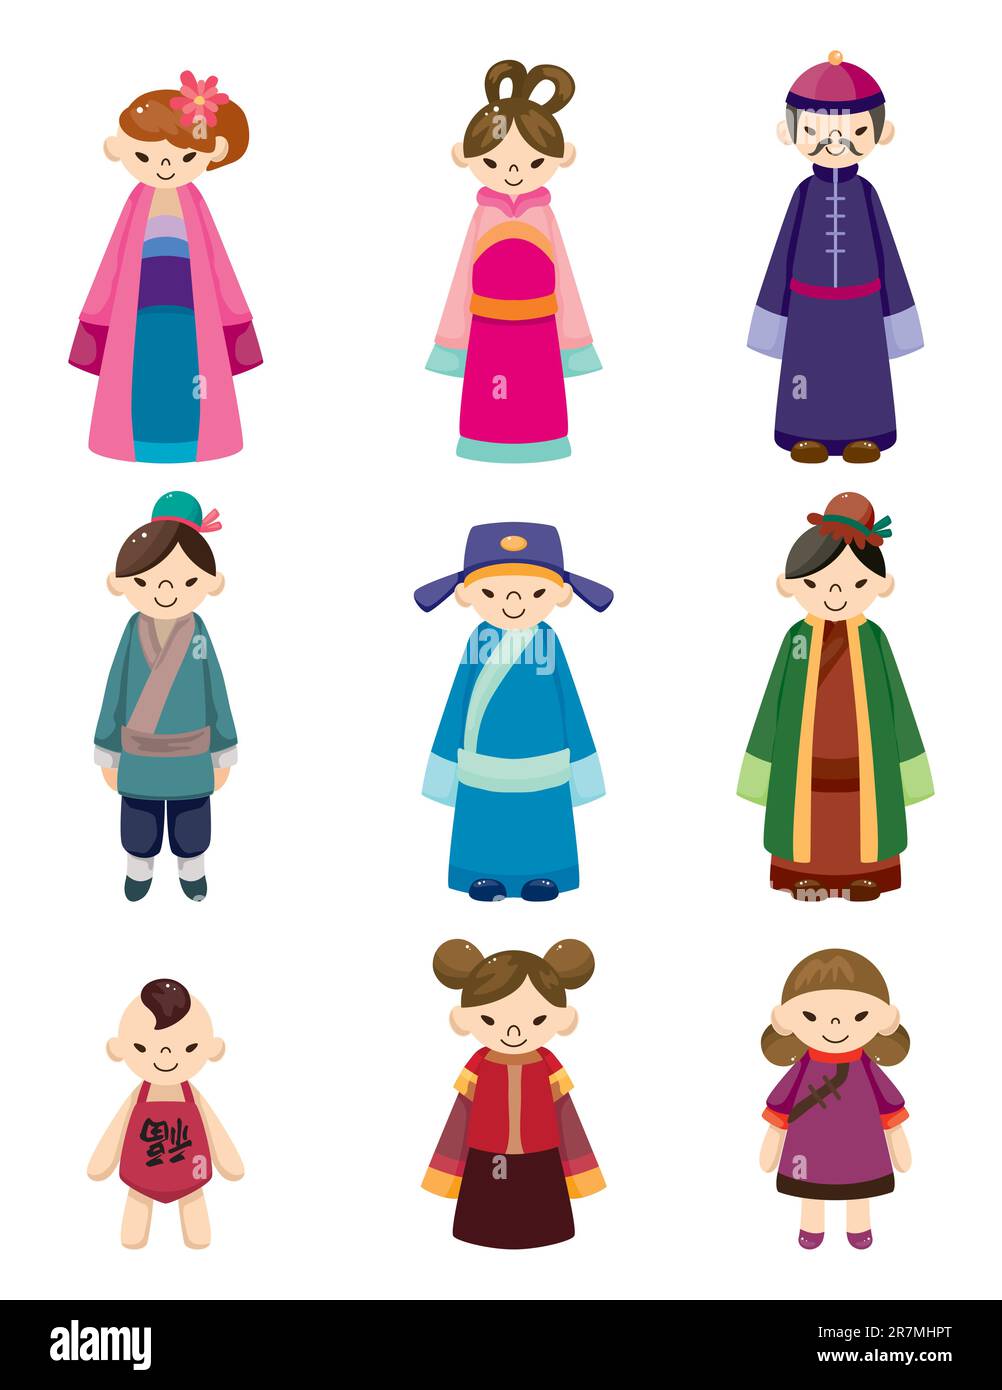 cartoon Chinese people icon set Stock Vector